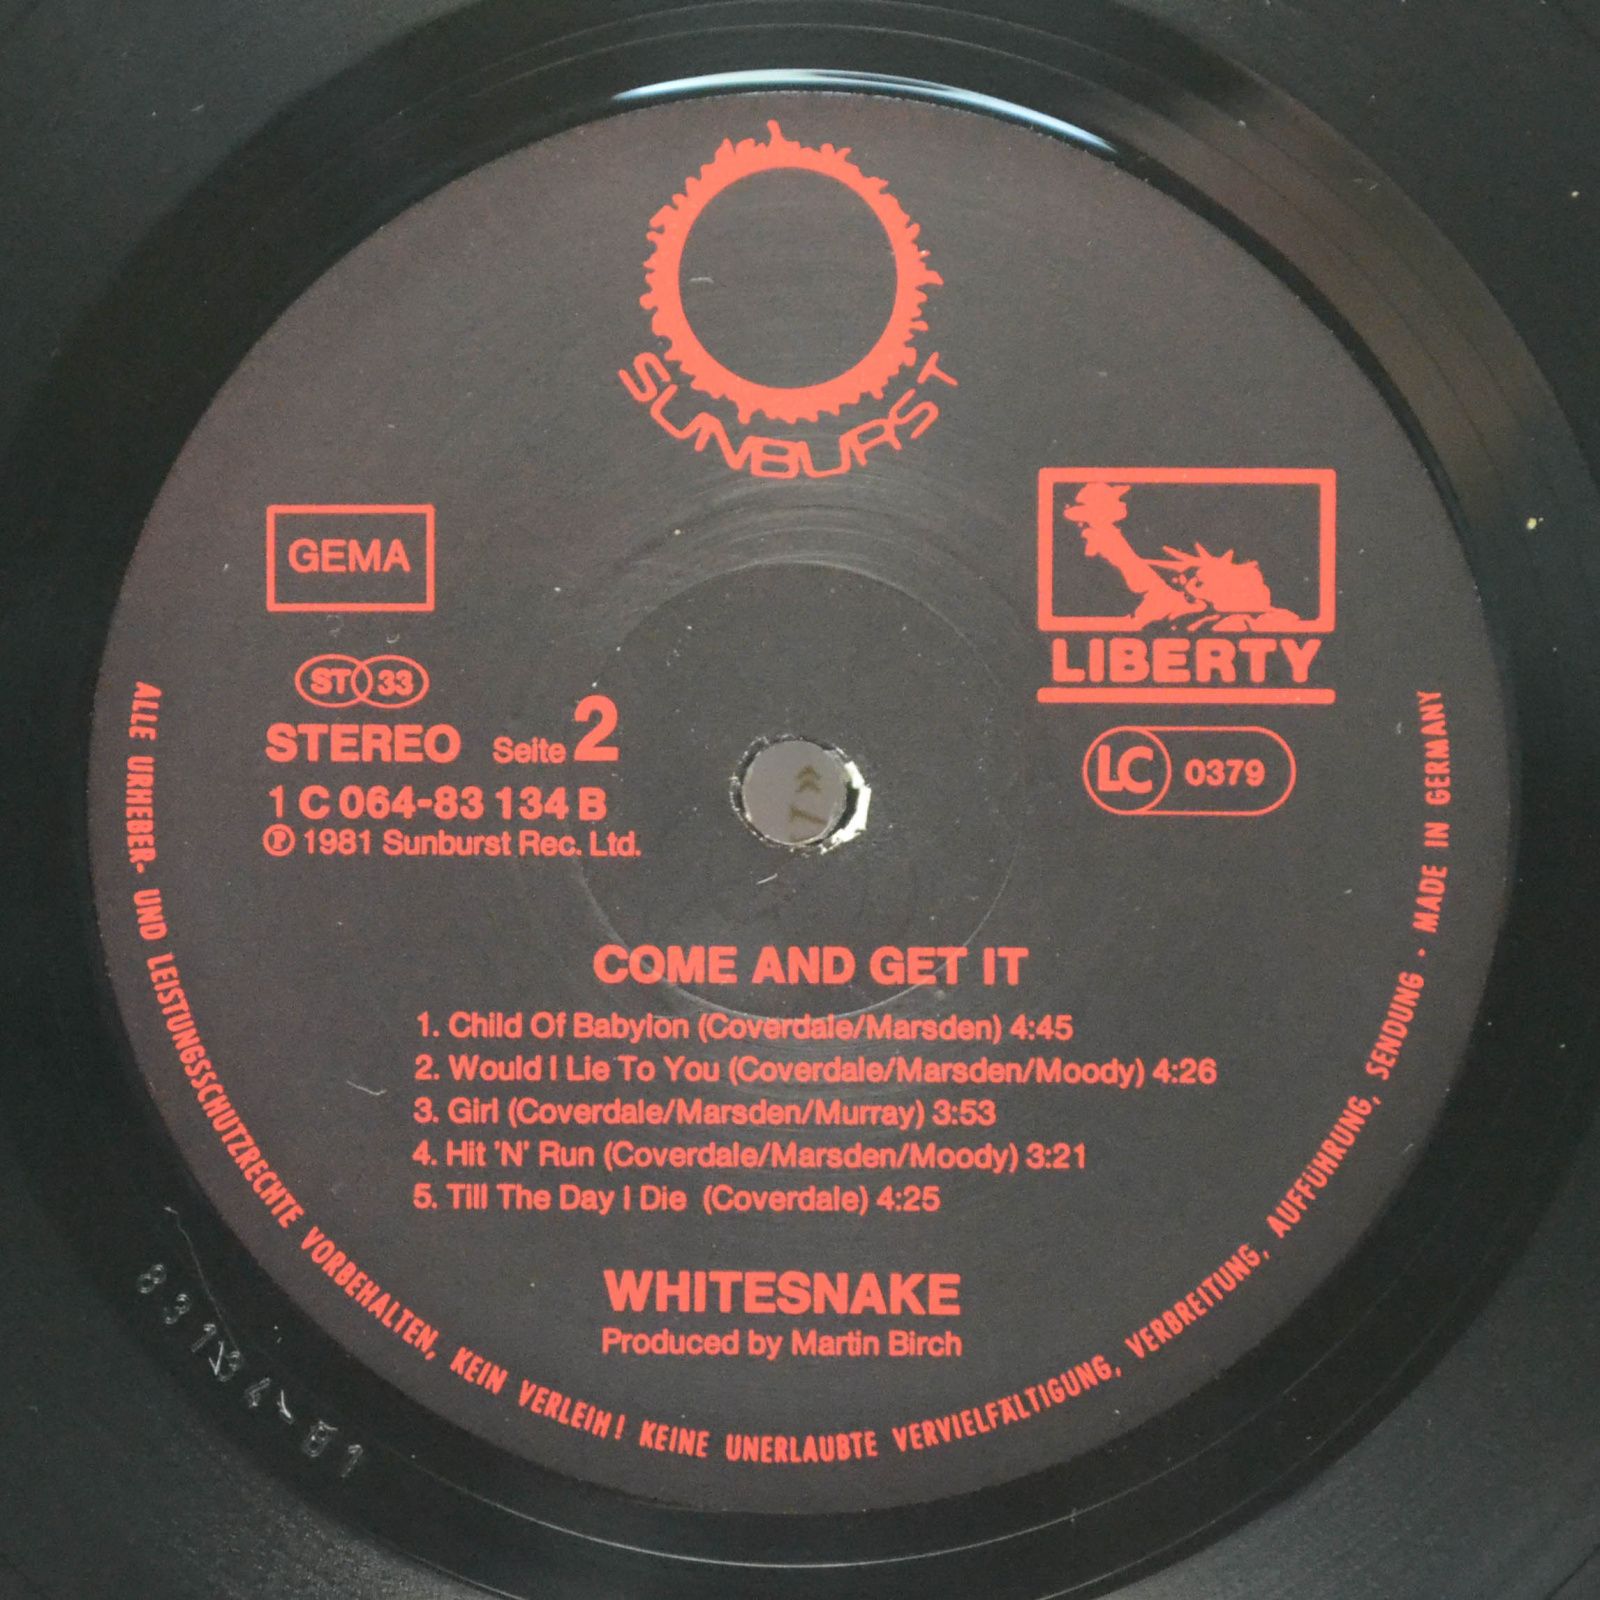 Whitesnake — Come An' Get It, 1981